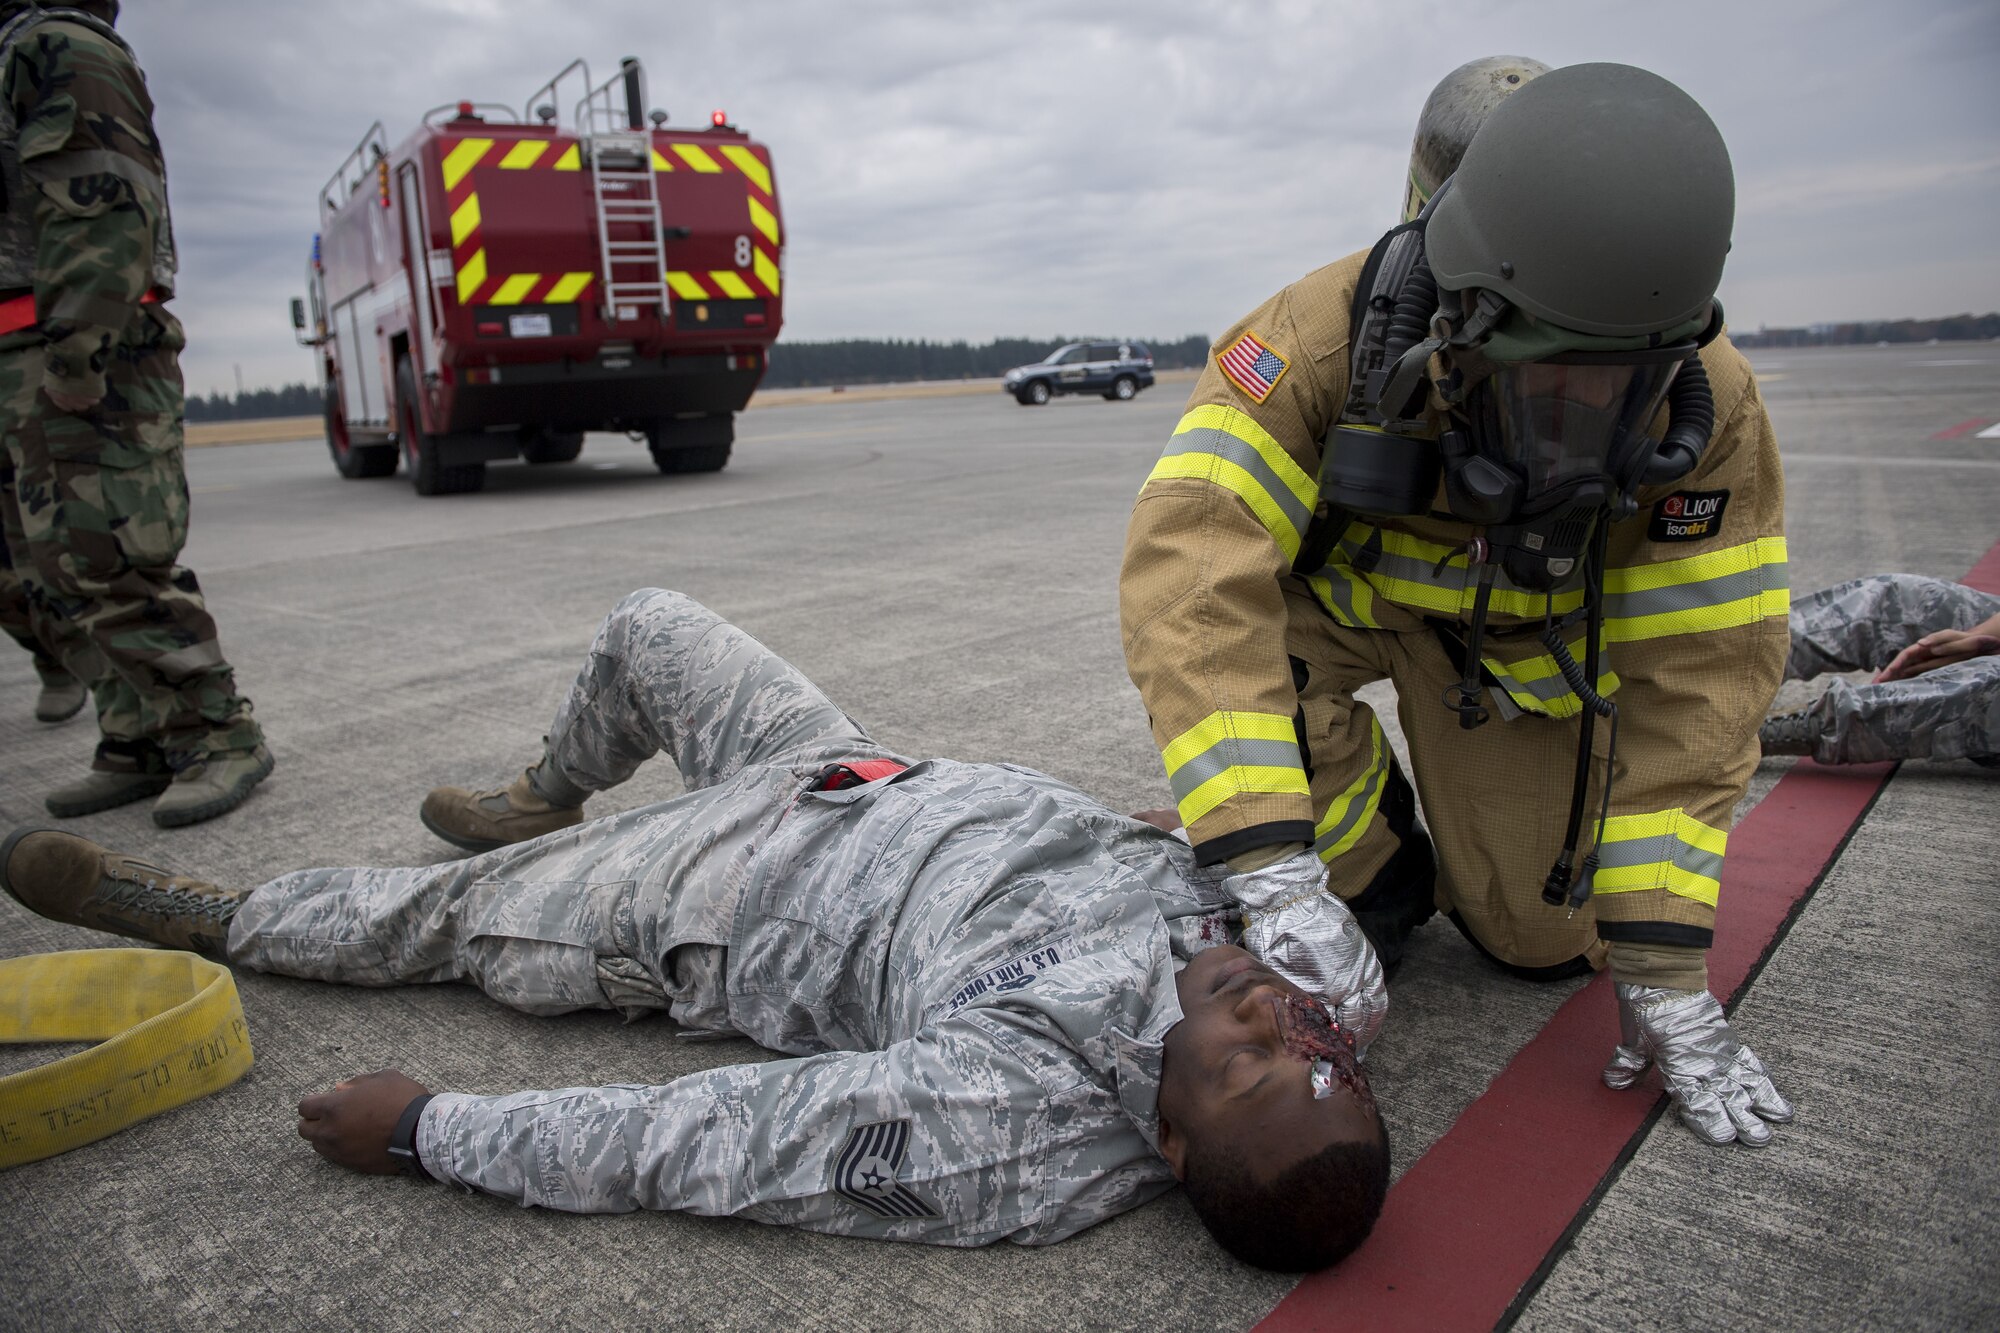 A 374th Civil Engineer Squadron firefighter checks on the status of a simulated injured service member during exercise Beverly Morning 17-08 in conjunction with exercise Vigilant Ace 18, Dec. 4, 2017, at Yokota Air Base, Japan.